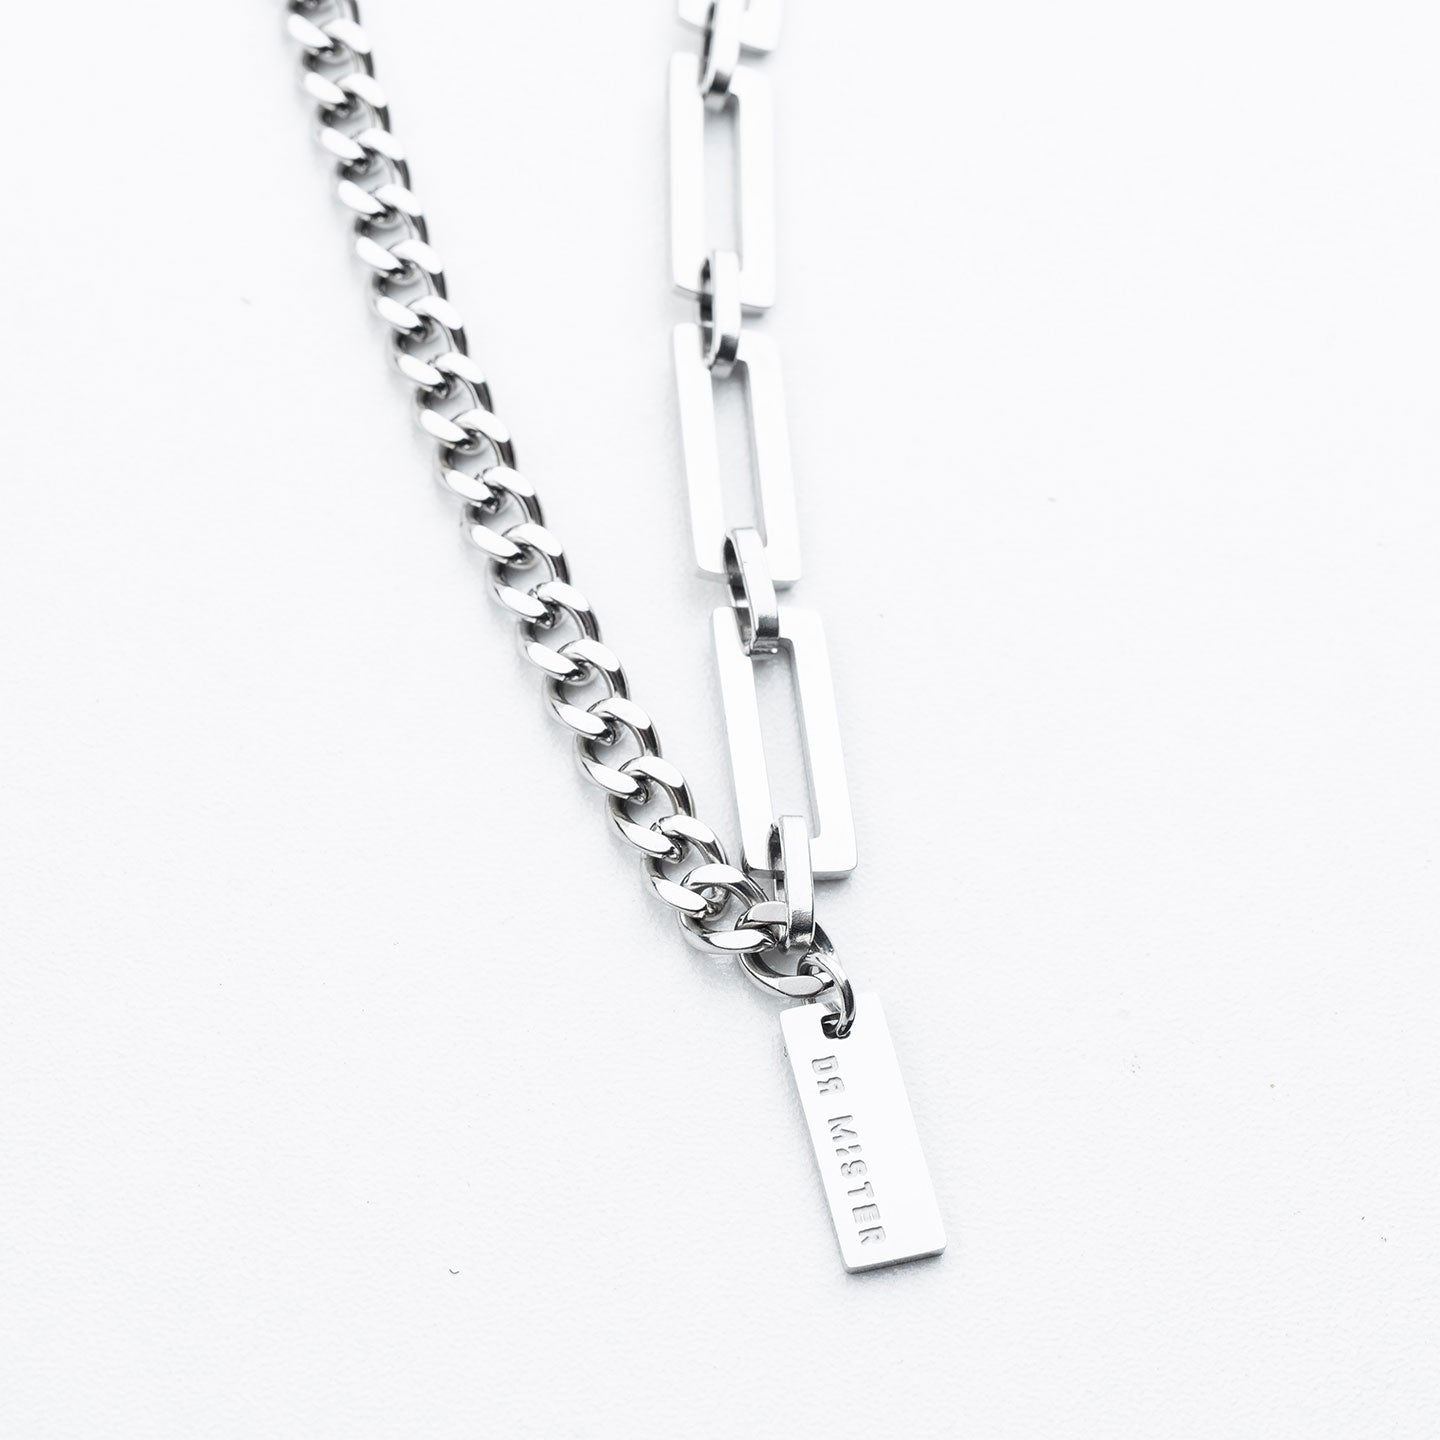 Elongated Square Hybrid Necklace - Silver